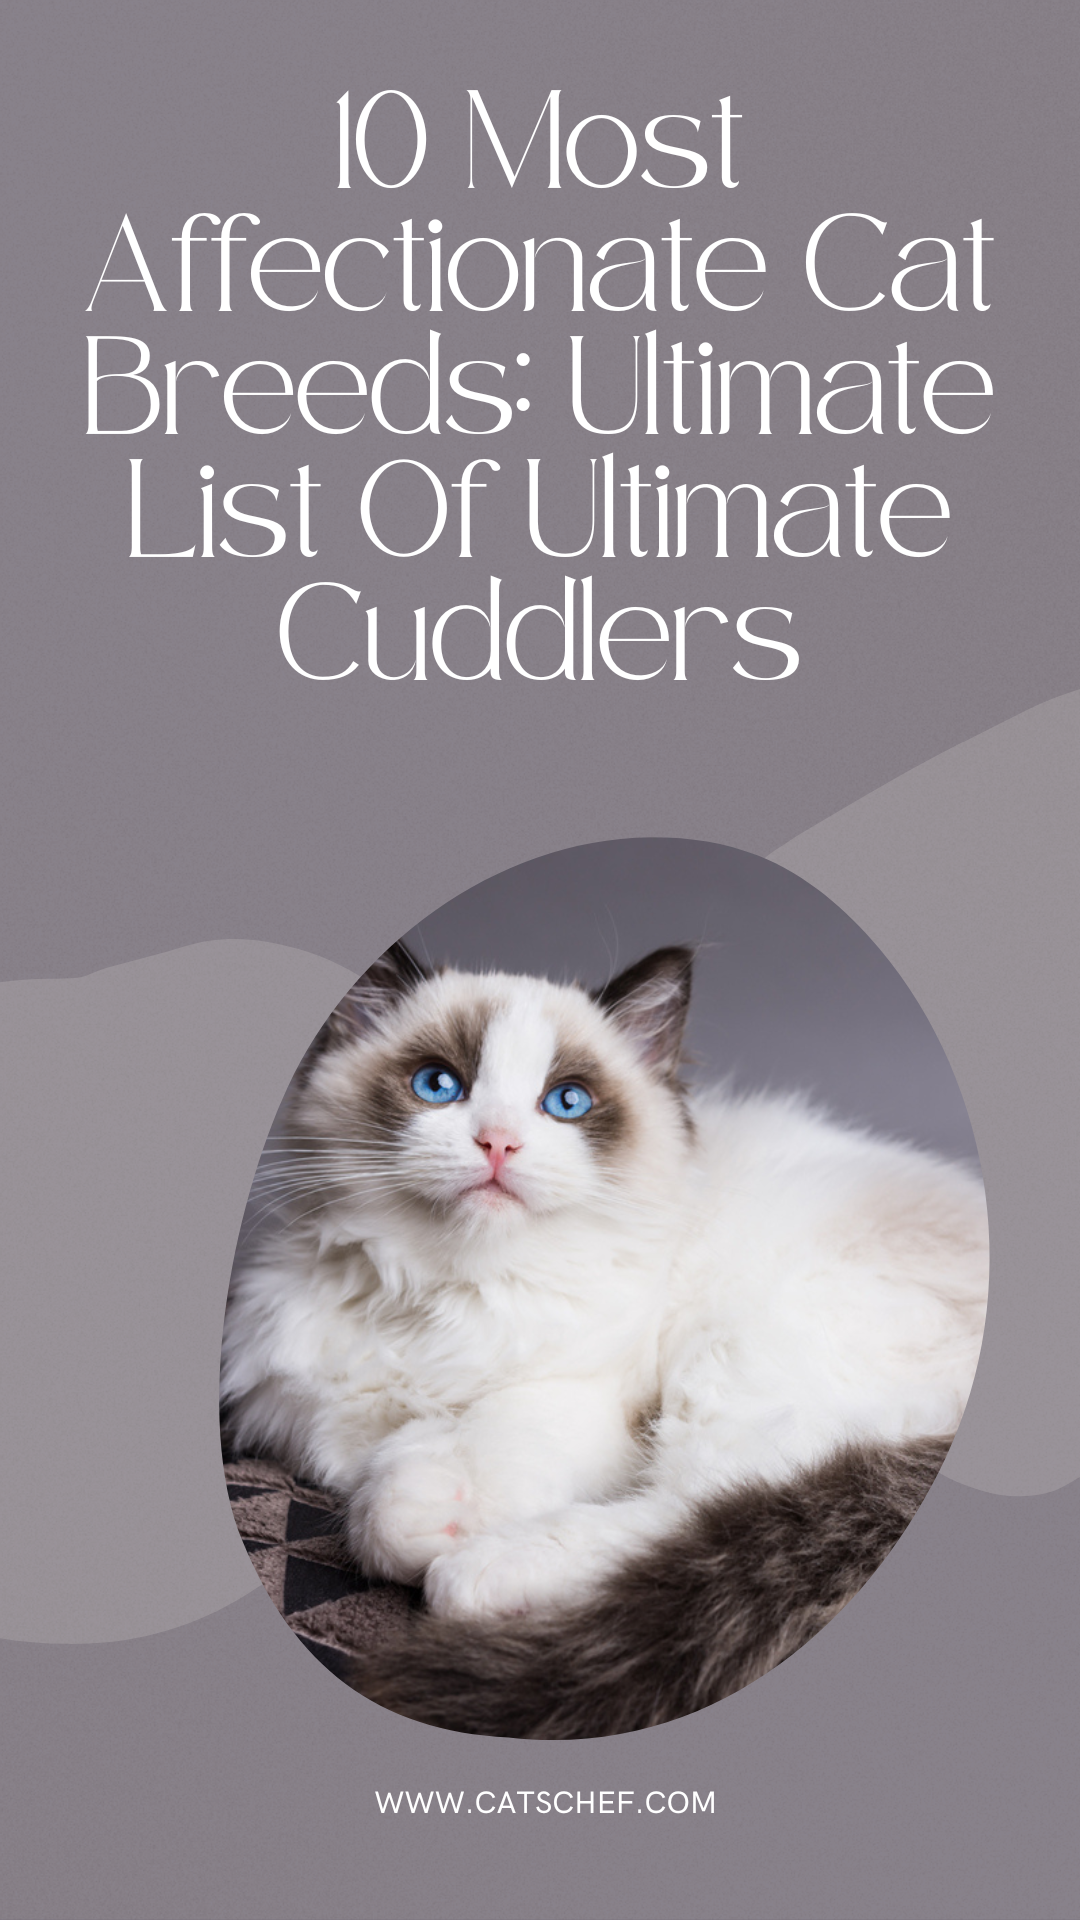 10 Most Affectionate Cat Breeds: Ultimate List Of Ultimate Cuddlers